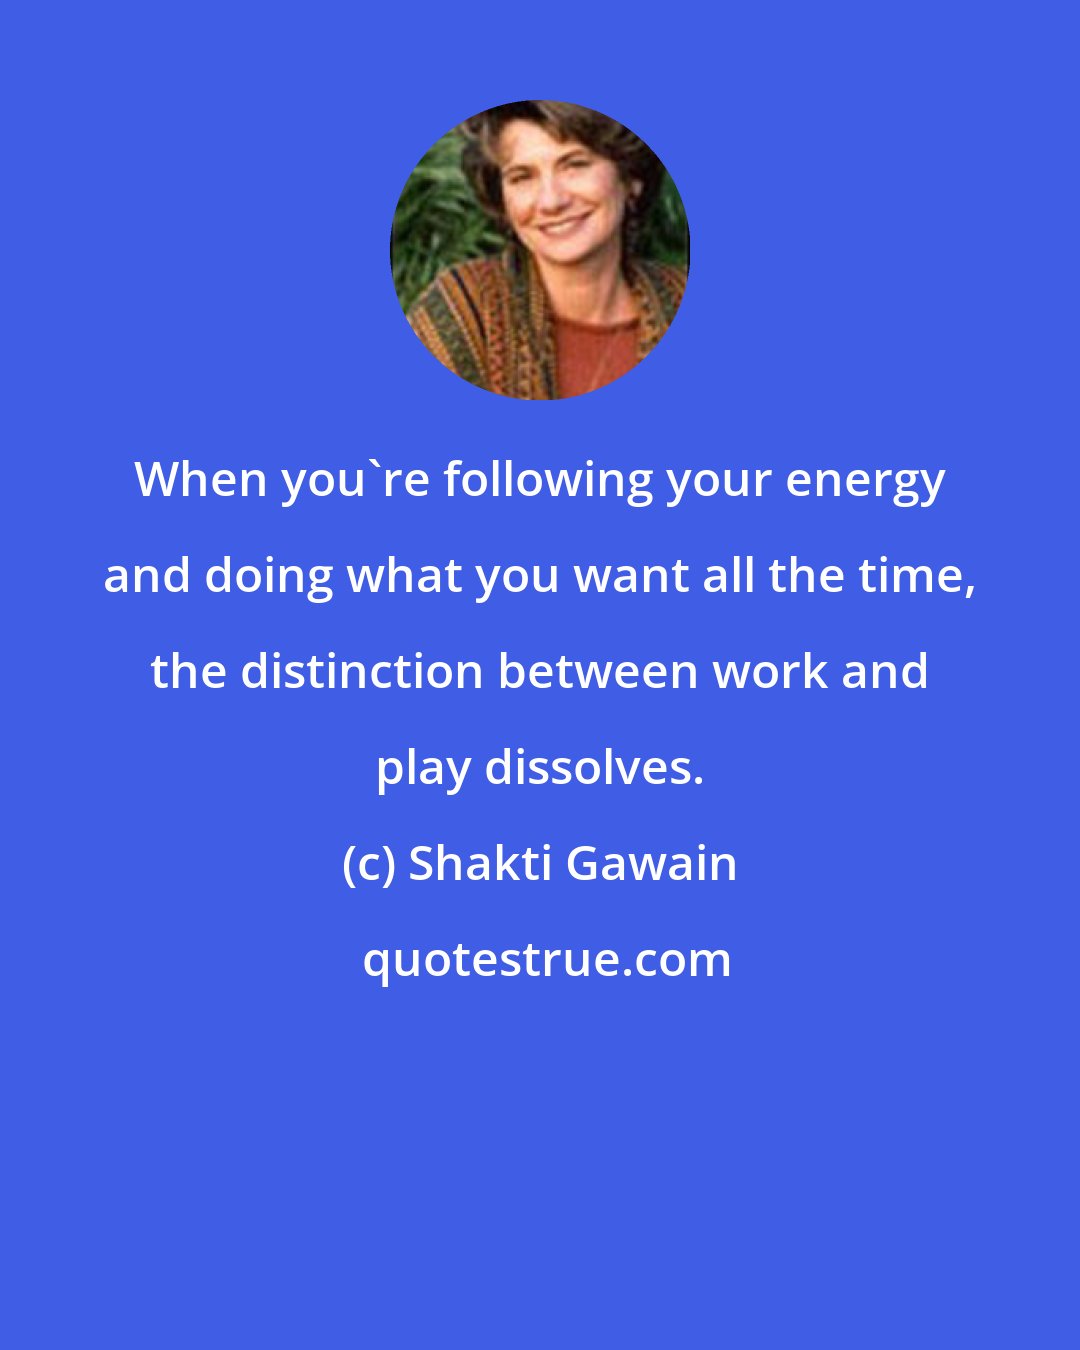 Shakti Gawain: When you're following your energy and doing what you want all the time, the distinction between work and play dissolves.